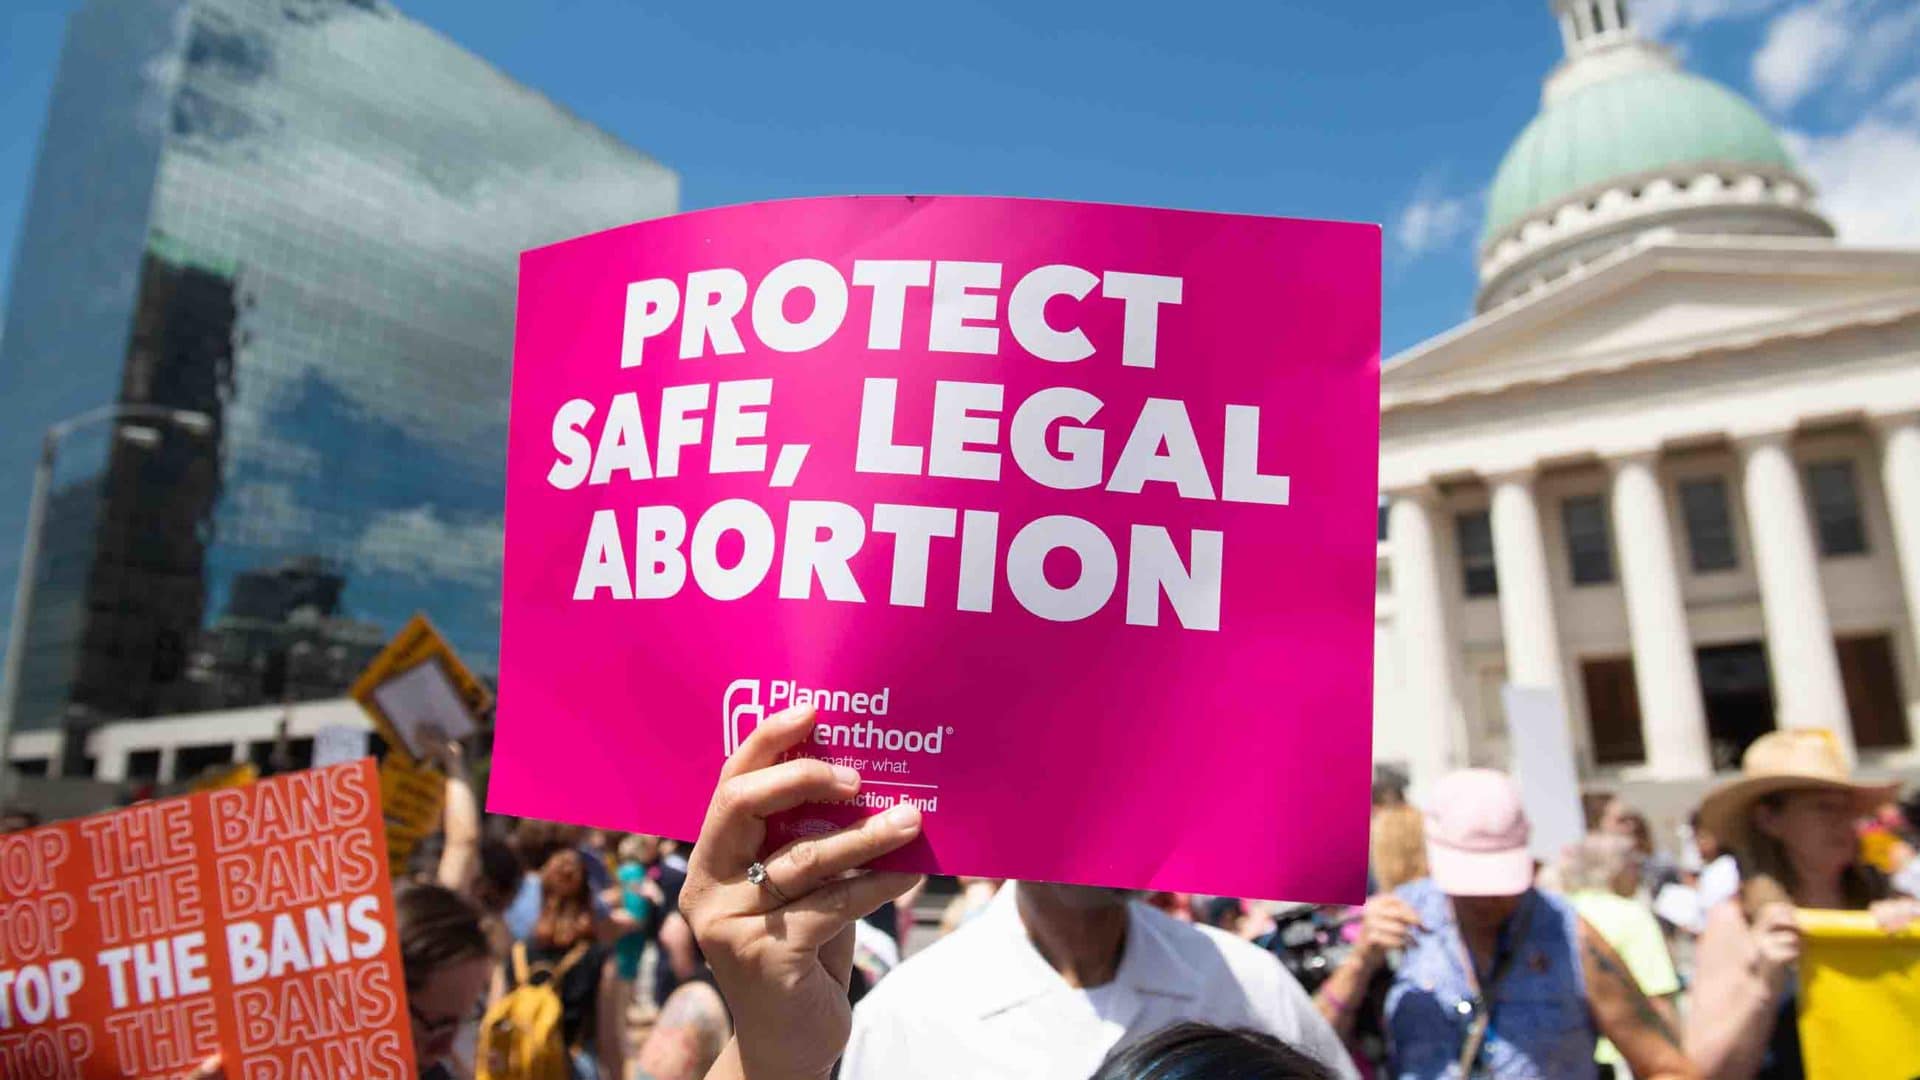 Protesters hold signs as they rally in support of Planned Parenthood and protest a state decision that would effectively halt abortions by revoking the center's license to perform the procedure, near the Old Courthouse in St. Louis, Missouri, May 30, 2019.